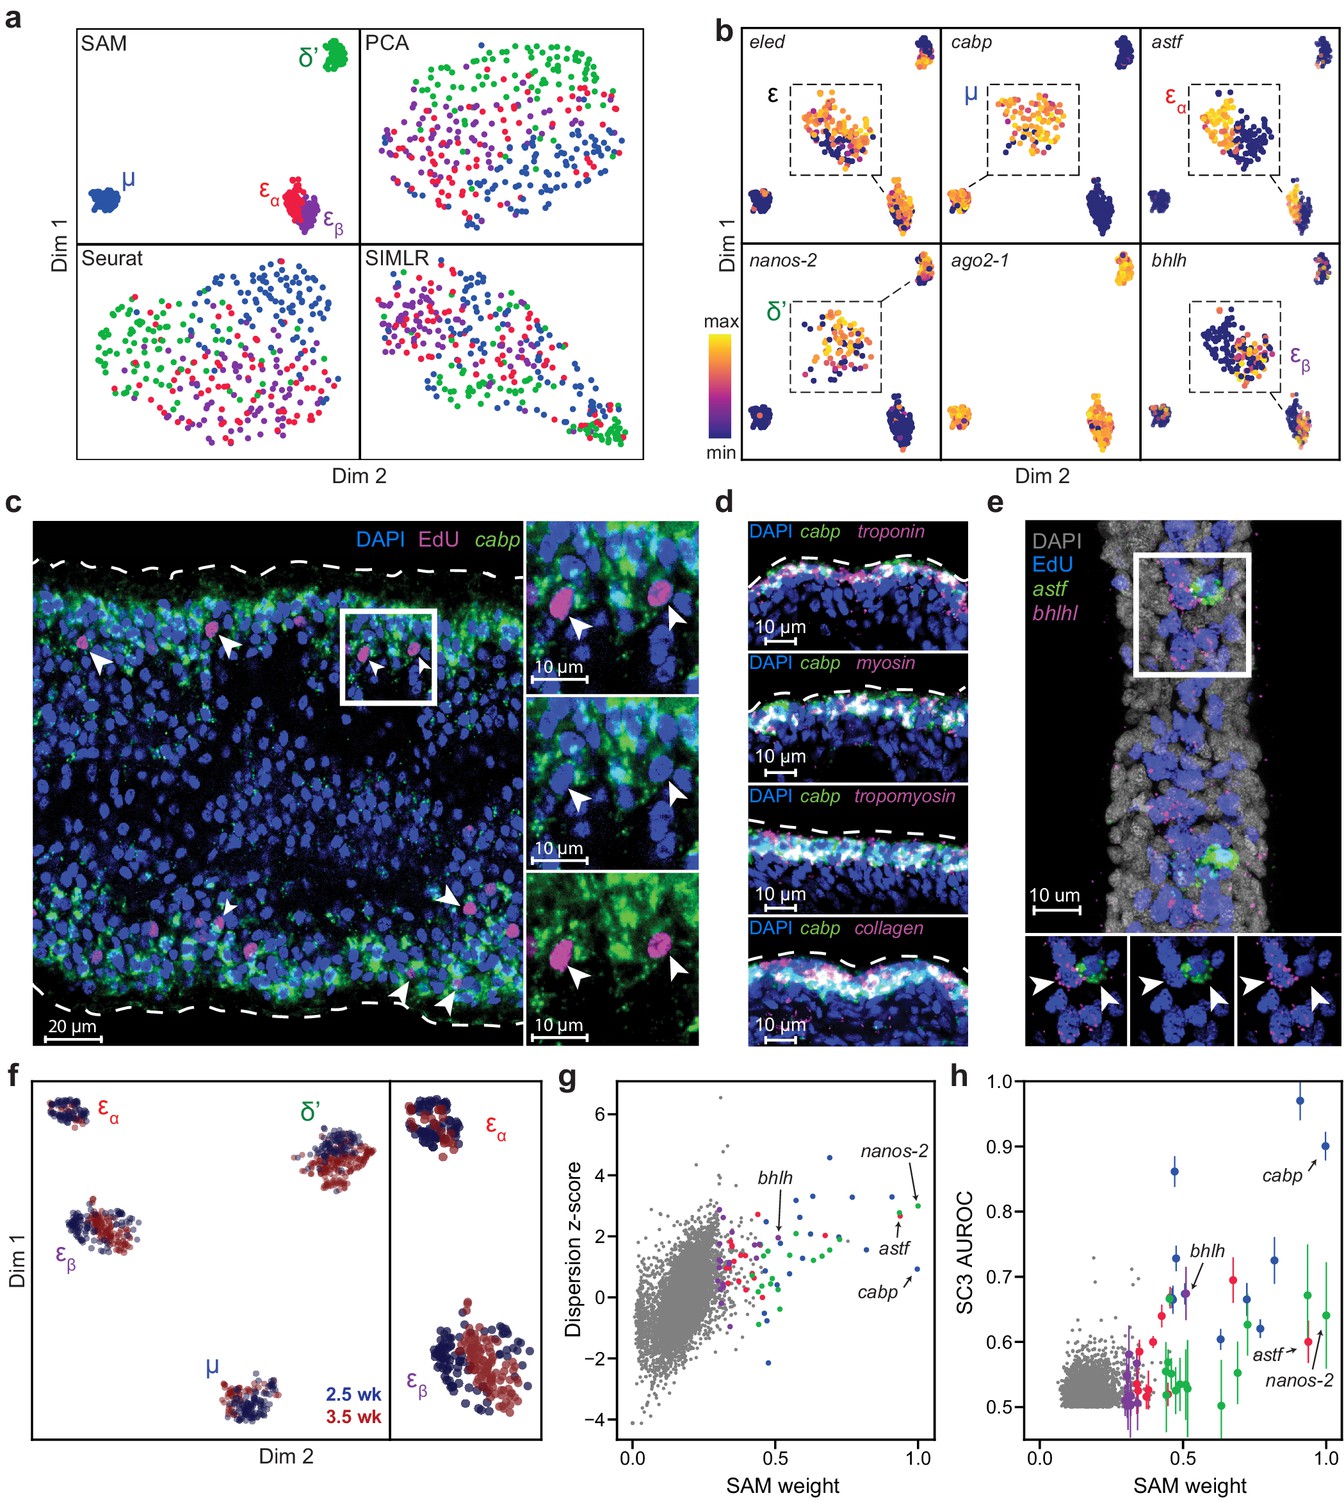 Self-assembling manifolds in single-cell RNA sequencing data